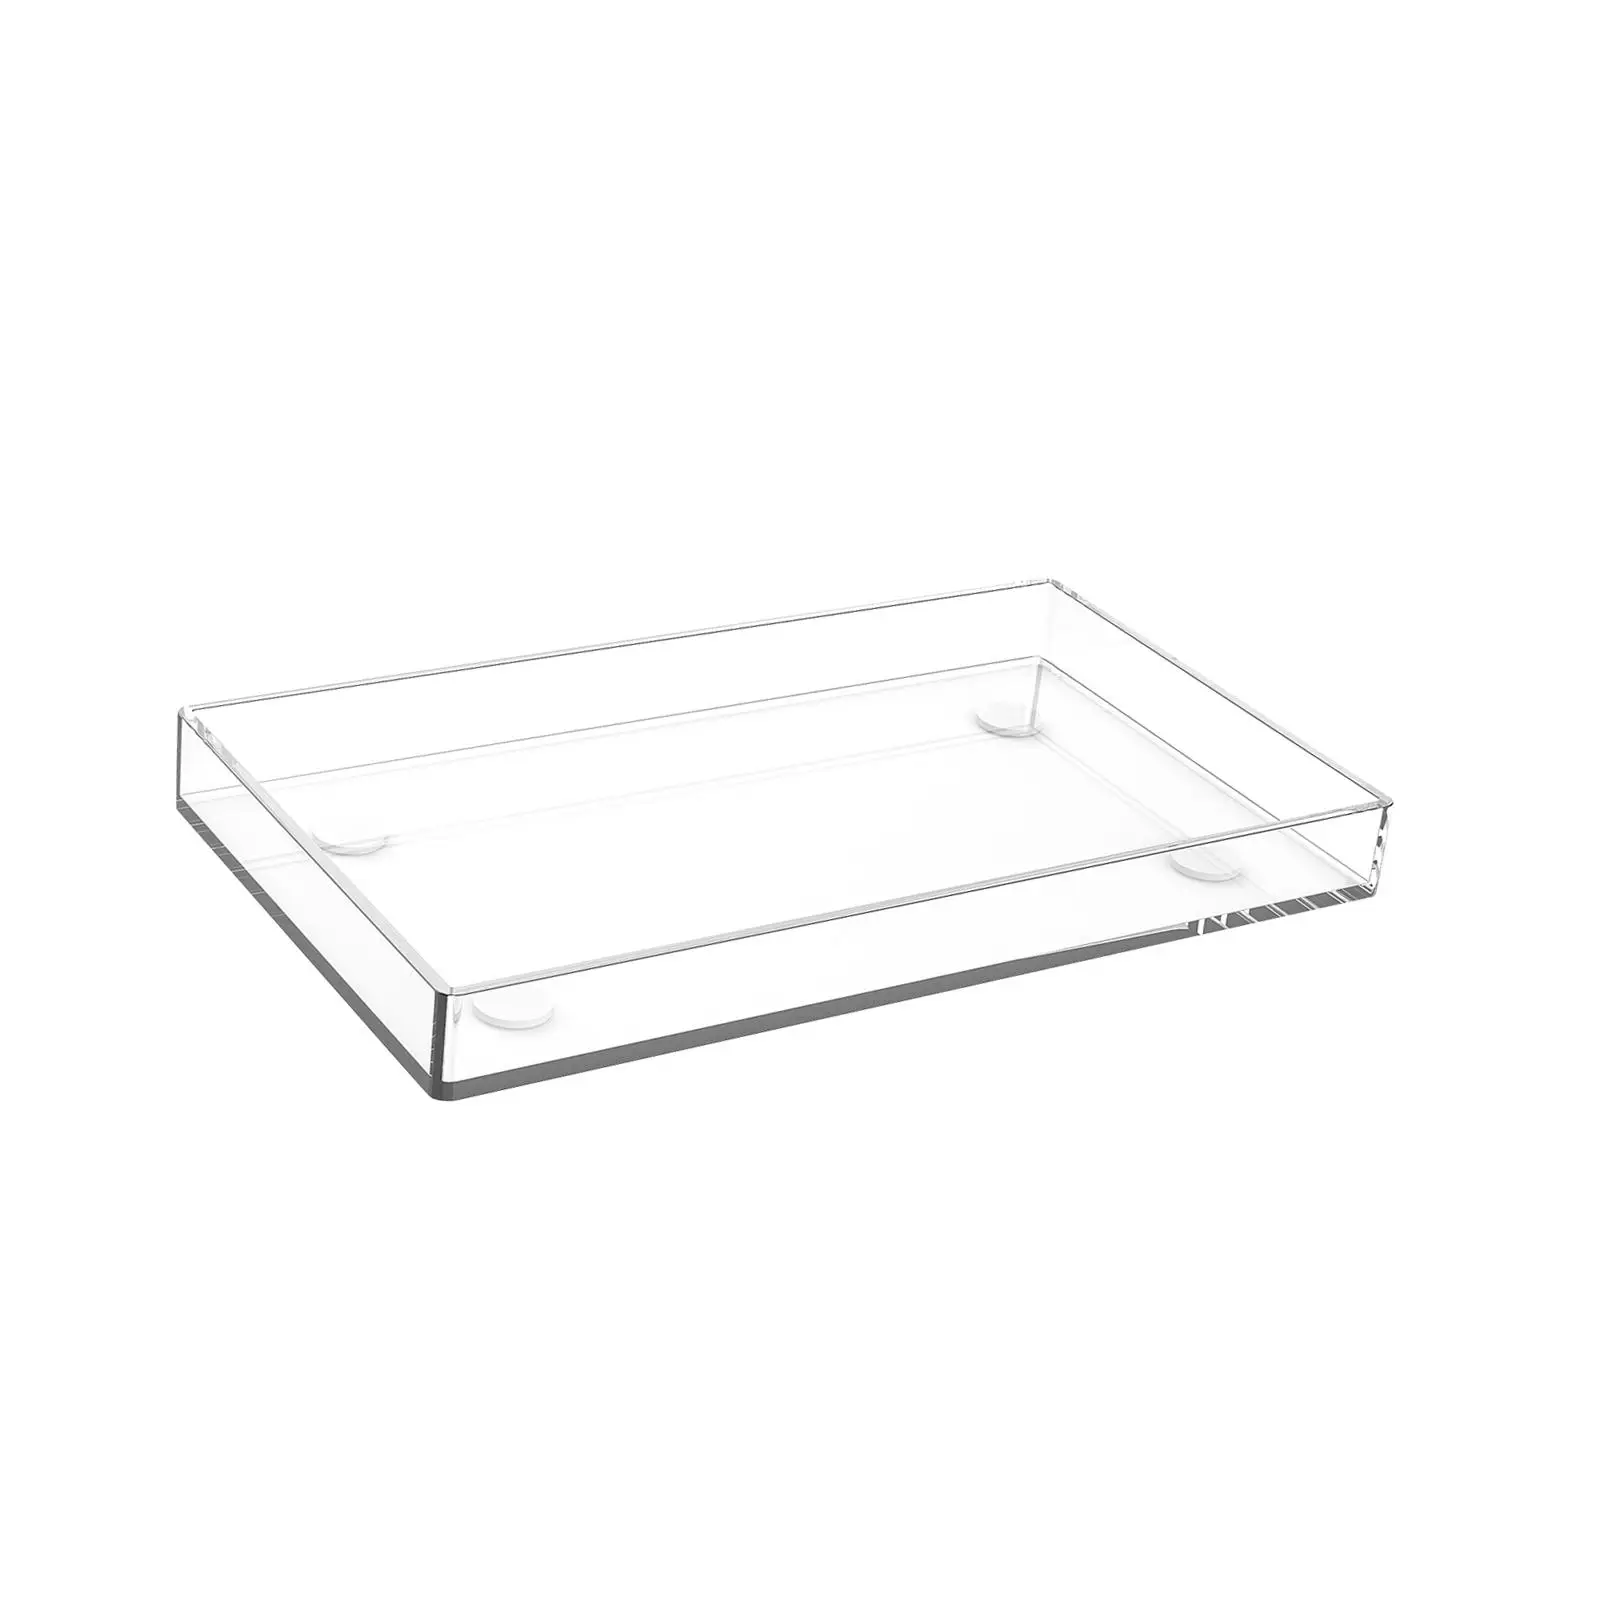 Clear Acrylic Tray Simple Modern Storage Tray Large Acrylic Tray for Towels Cosmetics and Accessories Household Bedside Office